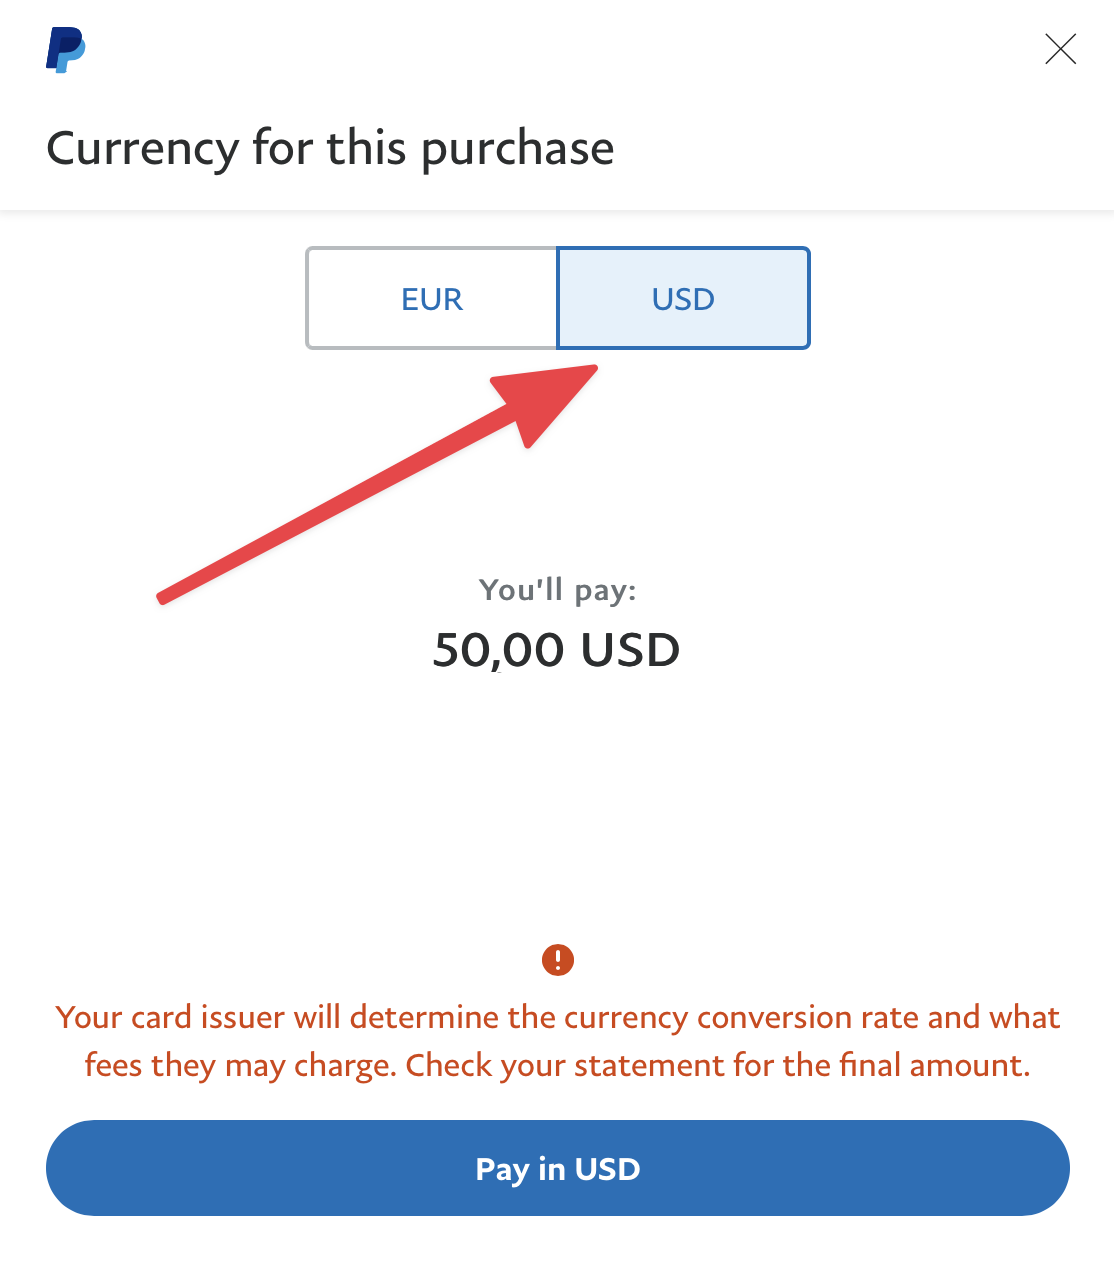 PayPal AUD - USD exchange rate